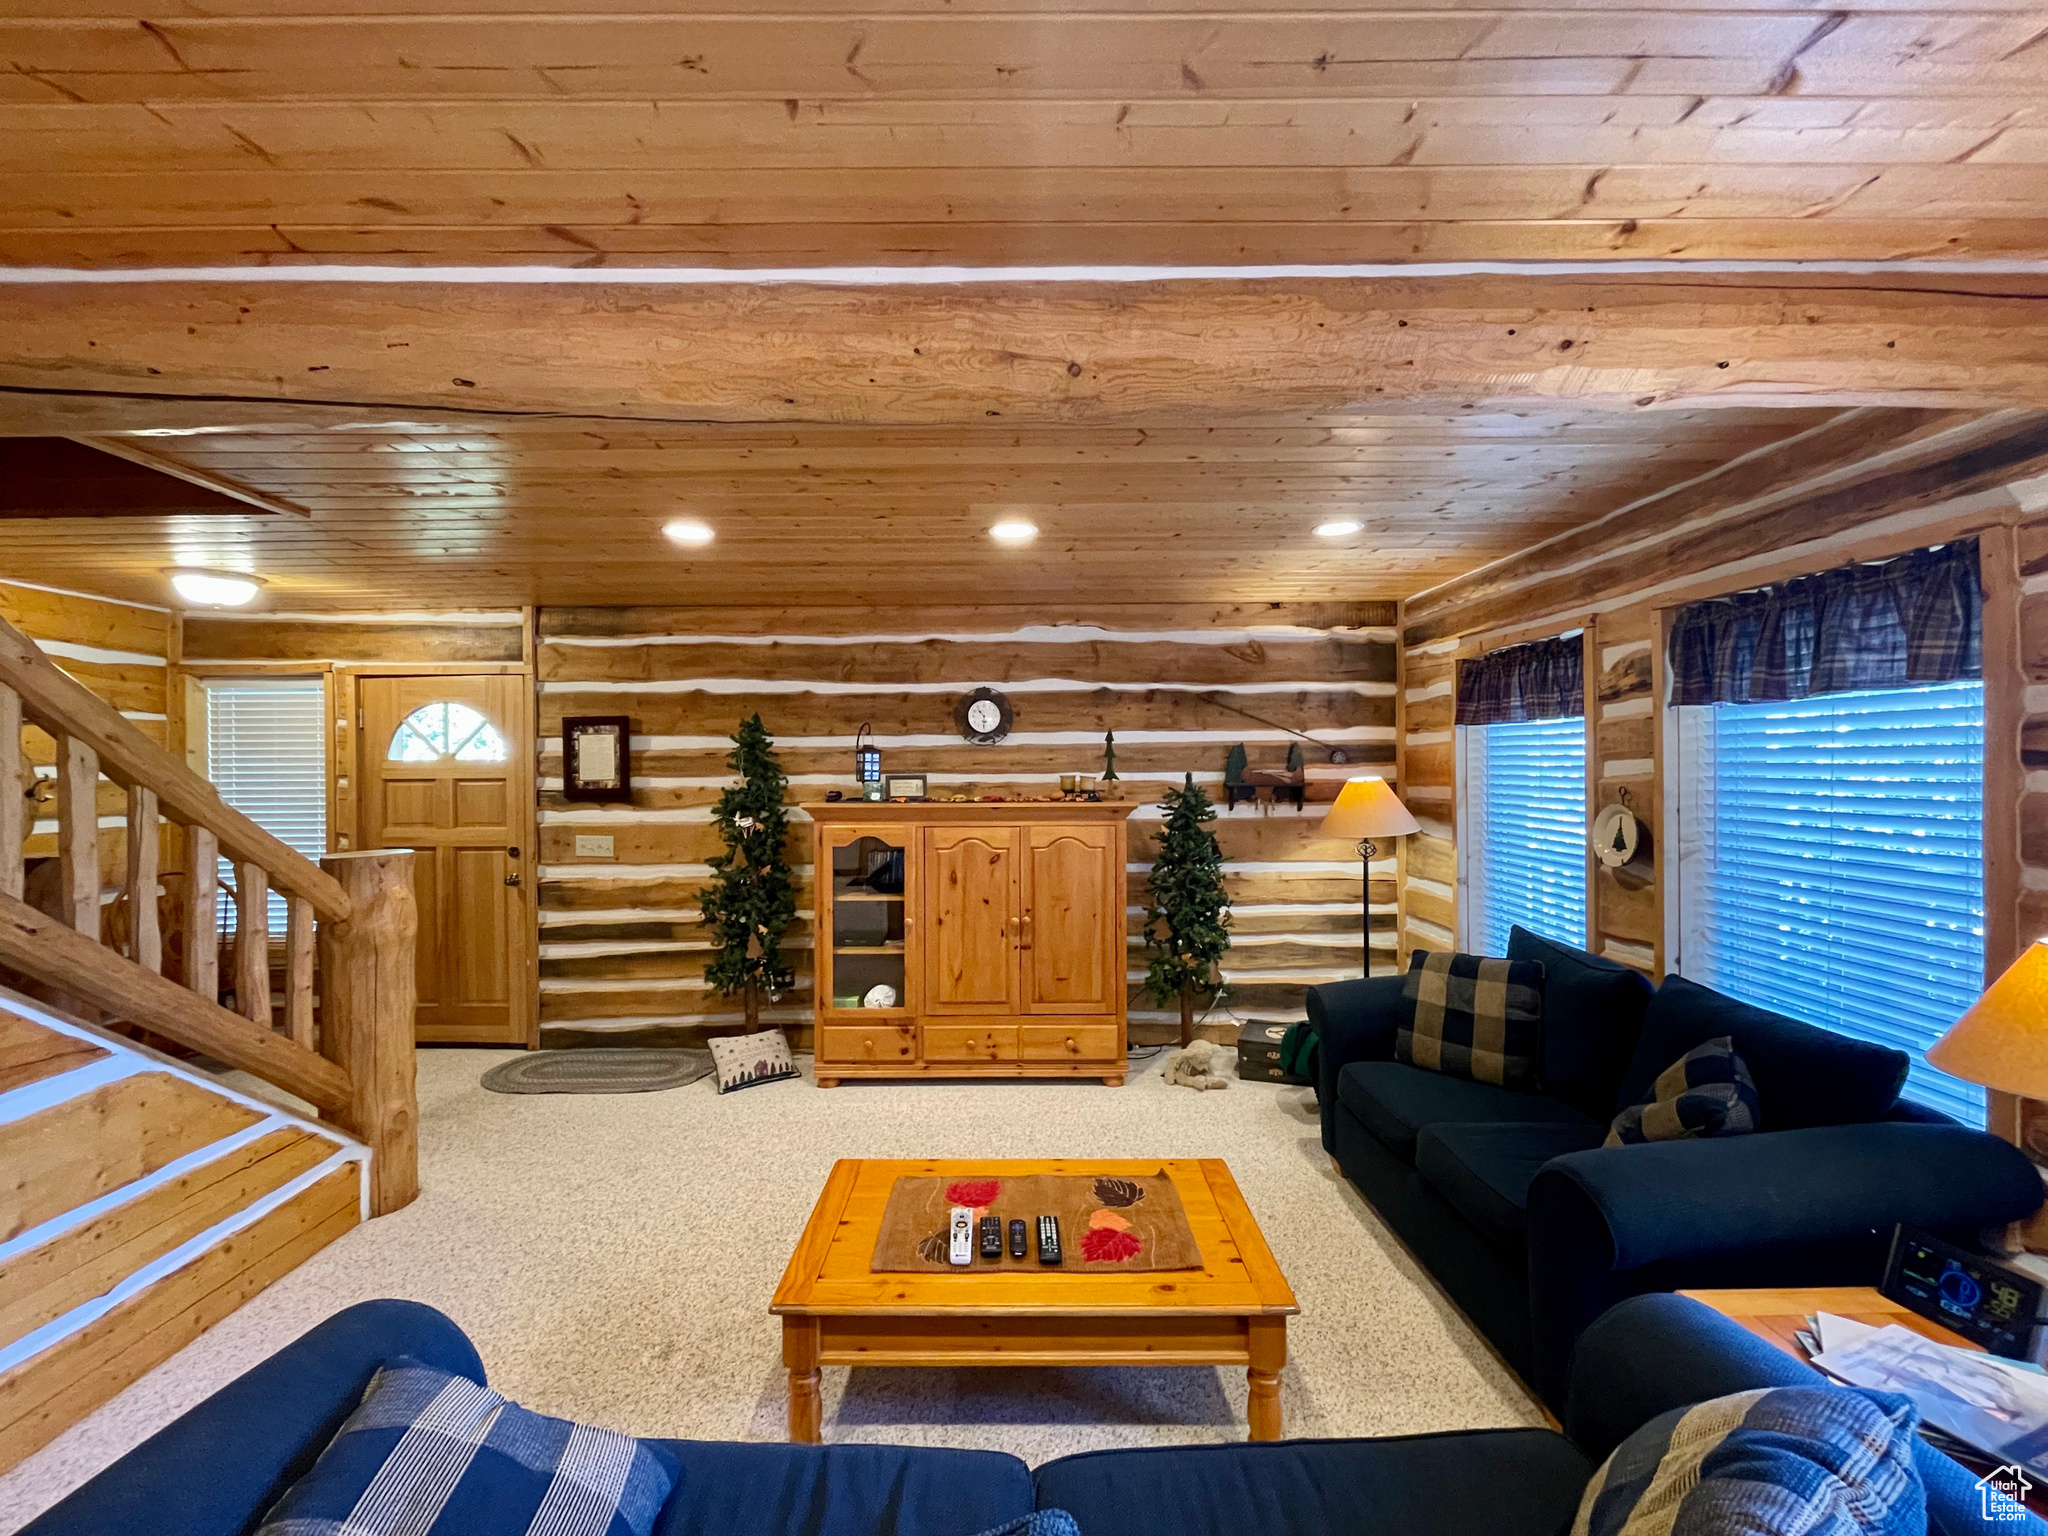 Living room featuring wooden ceiling, log walls, and light colored carpet